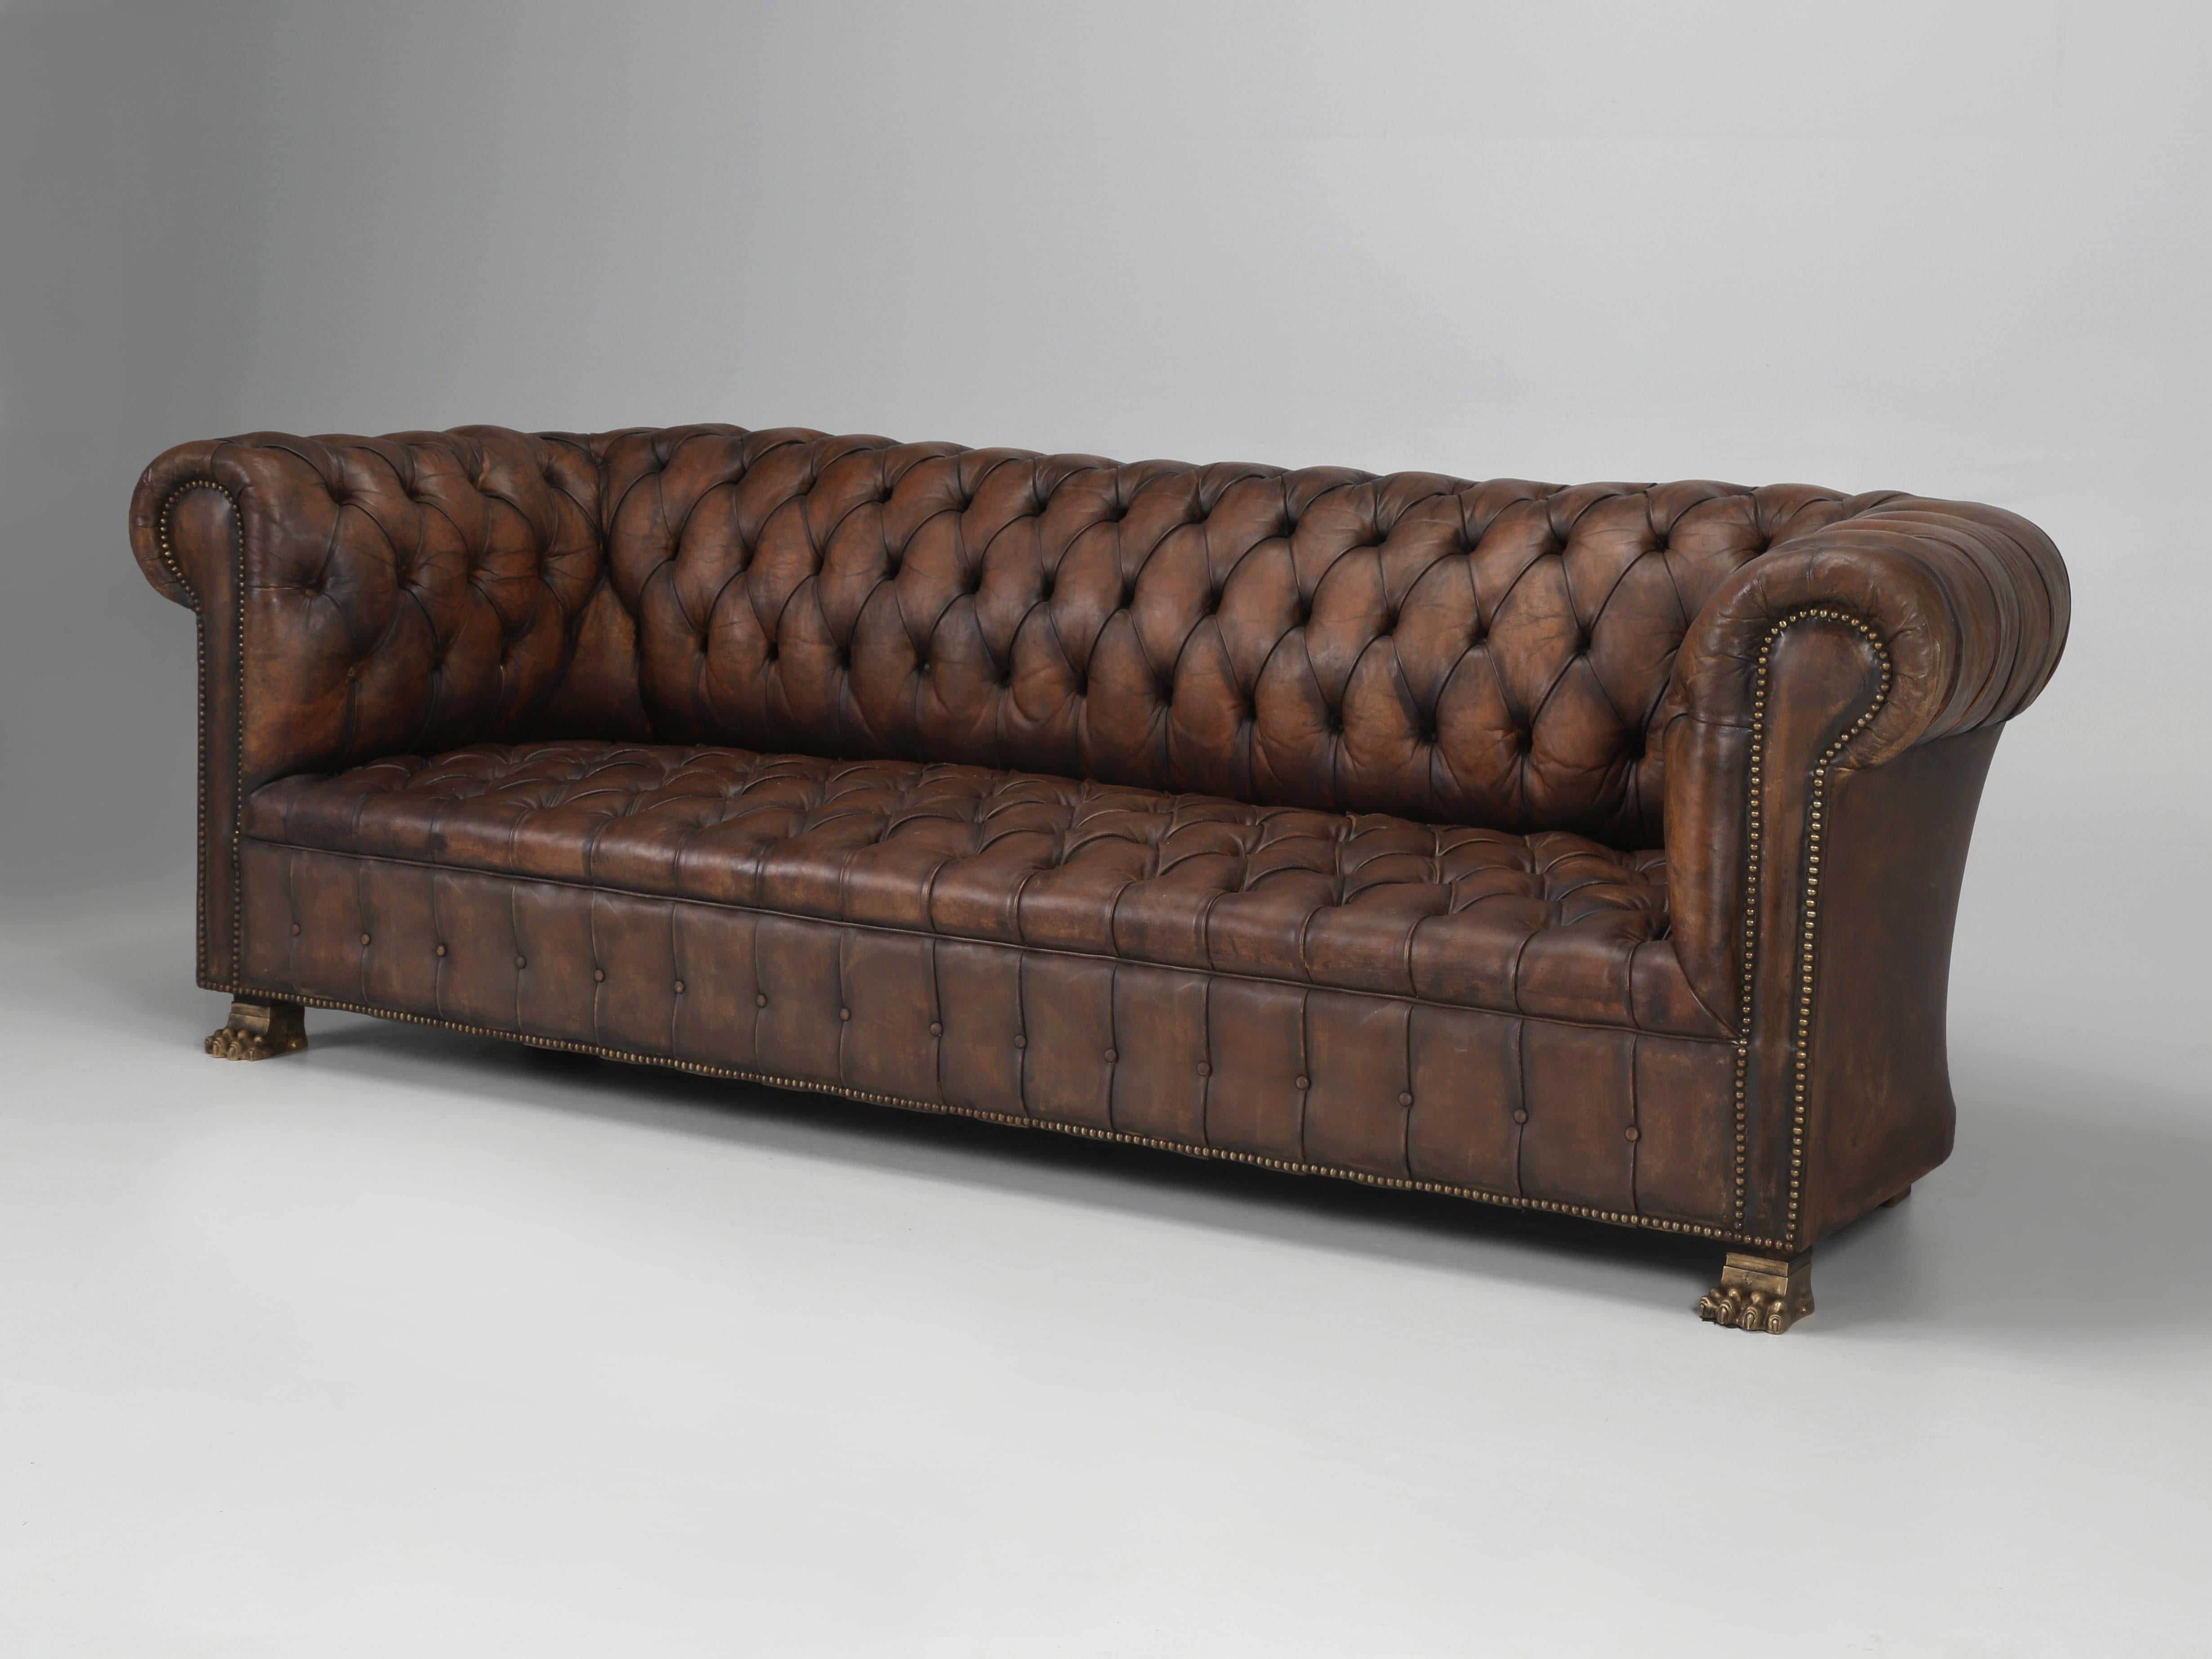 Old Chesterfield leather sofa that Old Plank recently imported from Ireland. Upon this old Chesterfield sofa’s arrival, it was immediately placed in a queue along with a few other leather Chesterfield sofas for restoration. We seem to have an